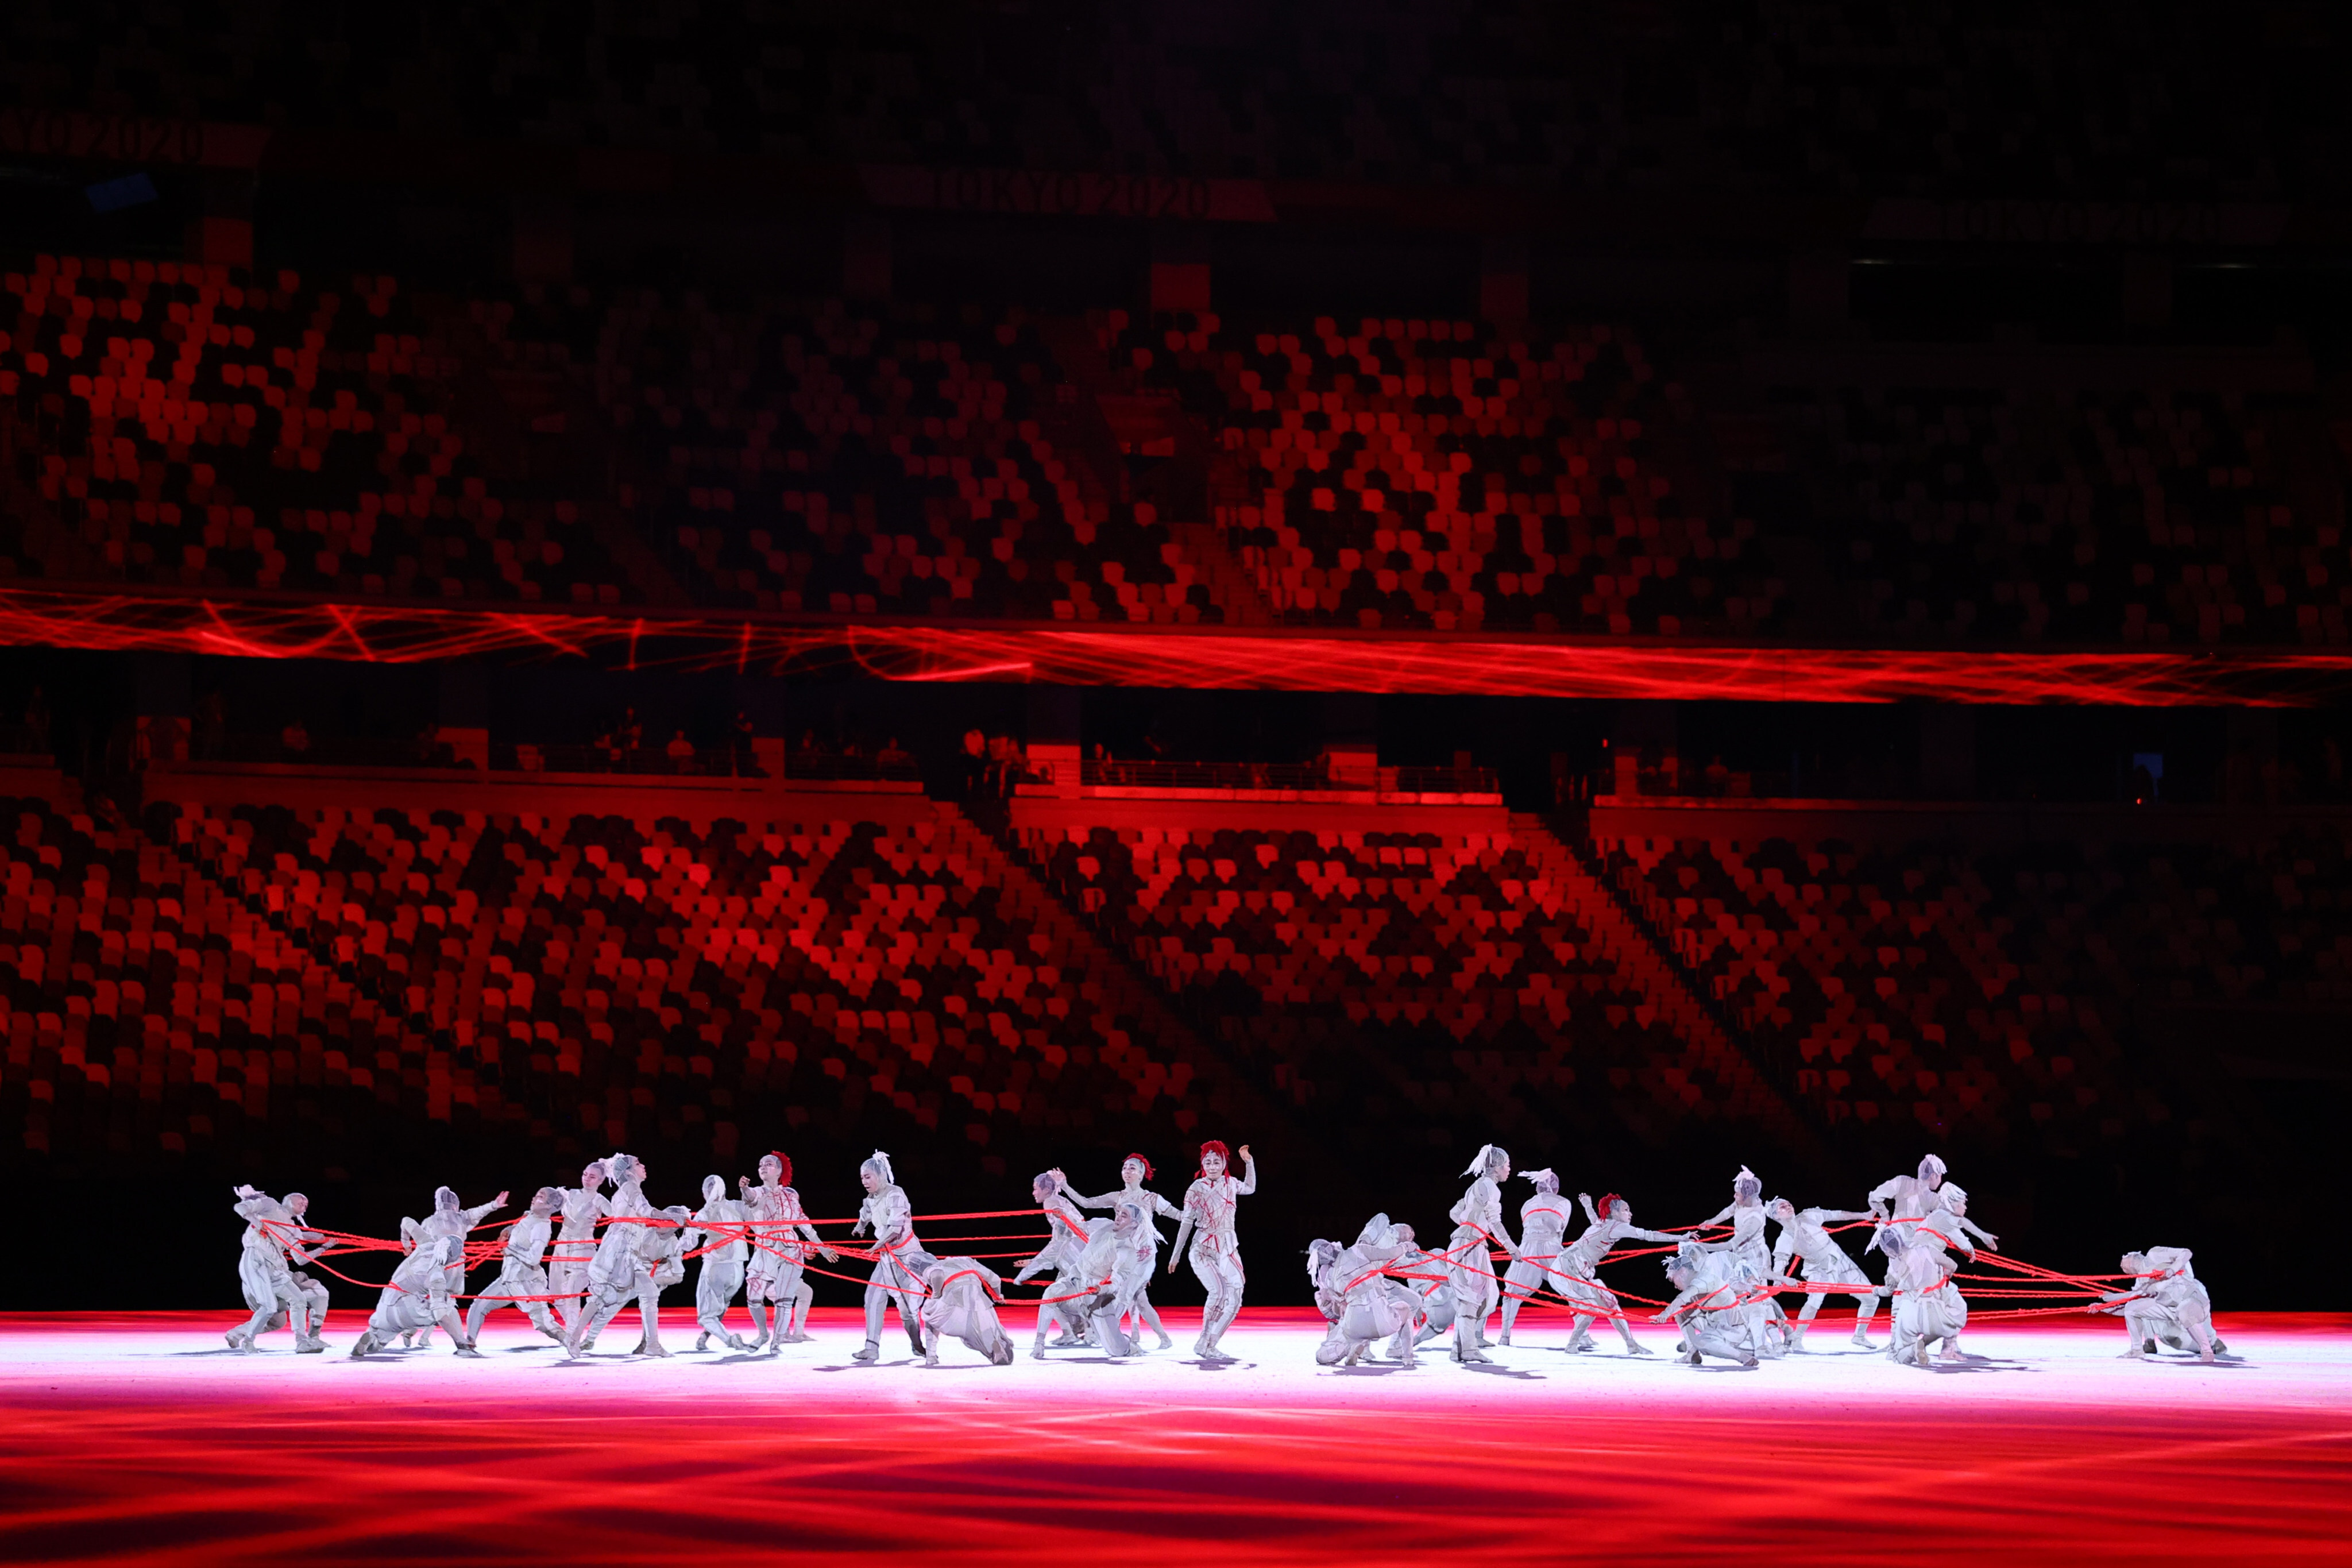 Performers put on a show before empty stands at the Tokyo 2020 Olympics opening ceremony on July 23. Photo: Reuters